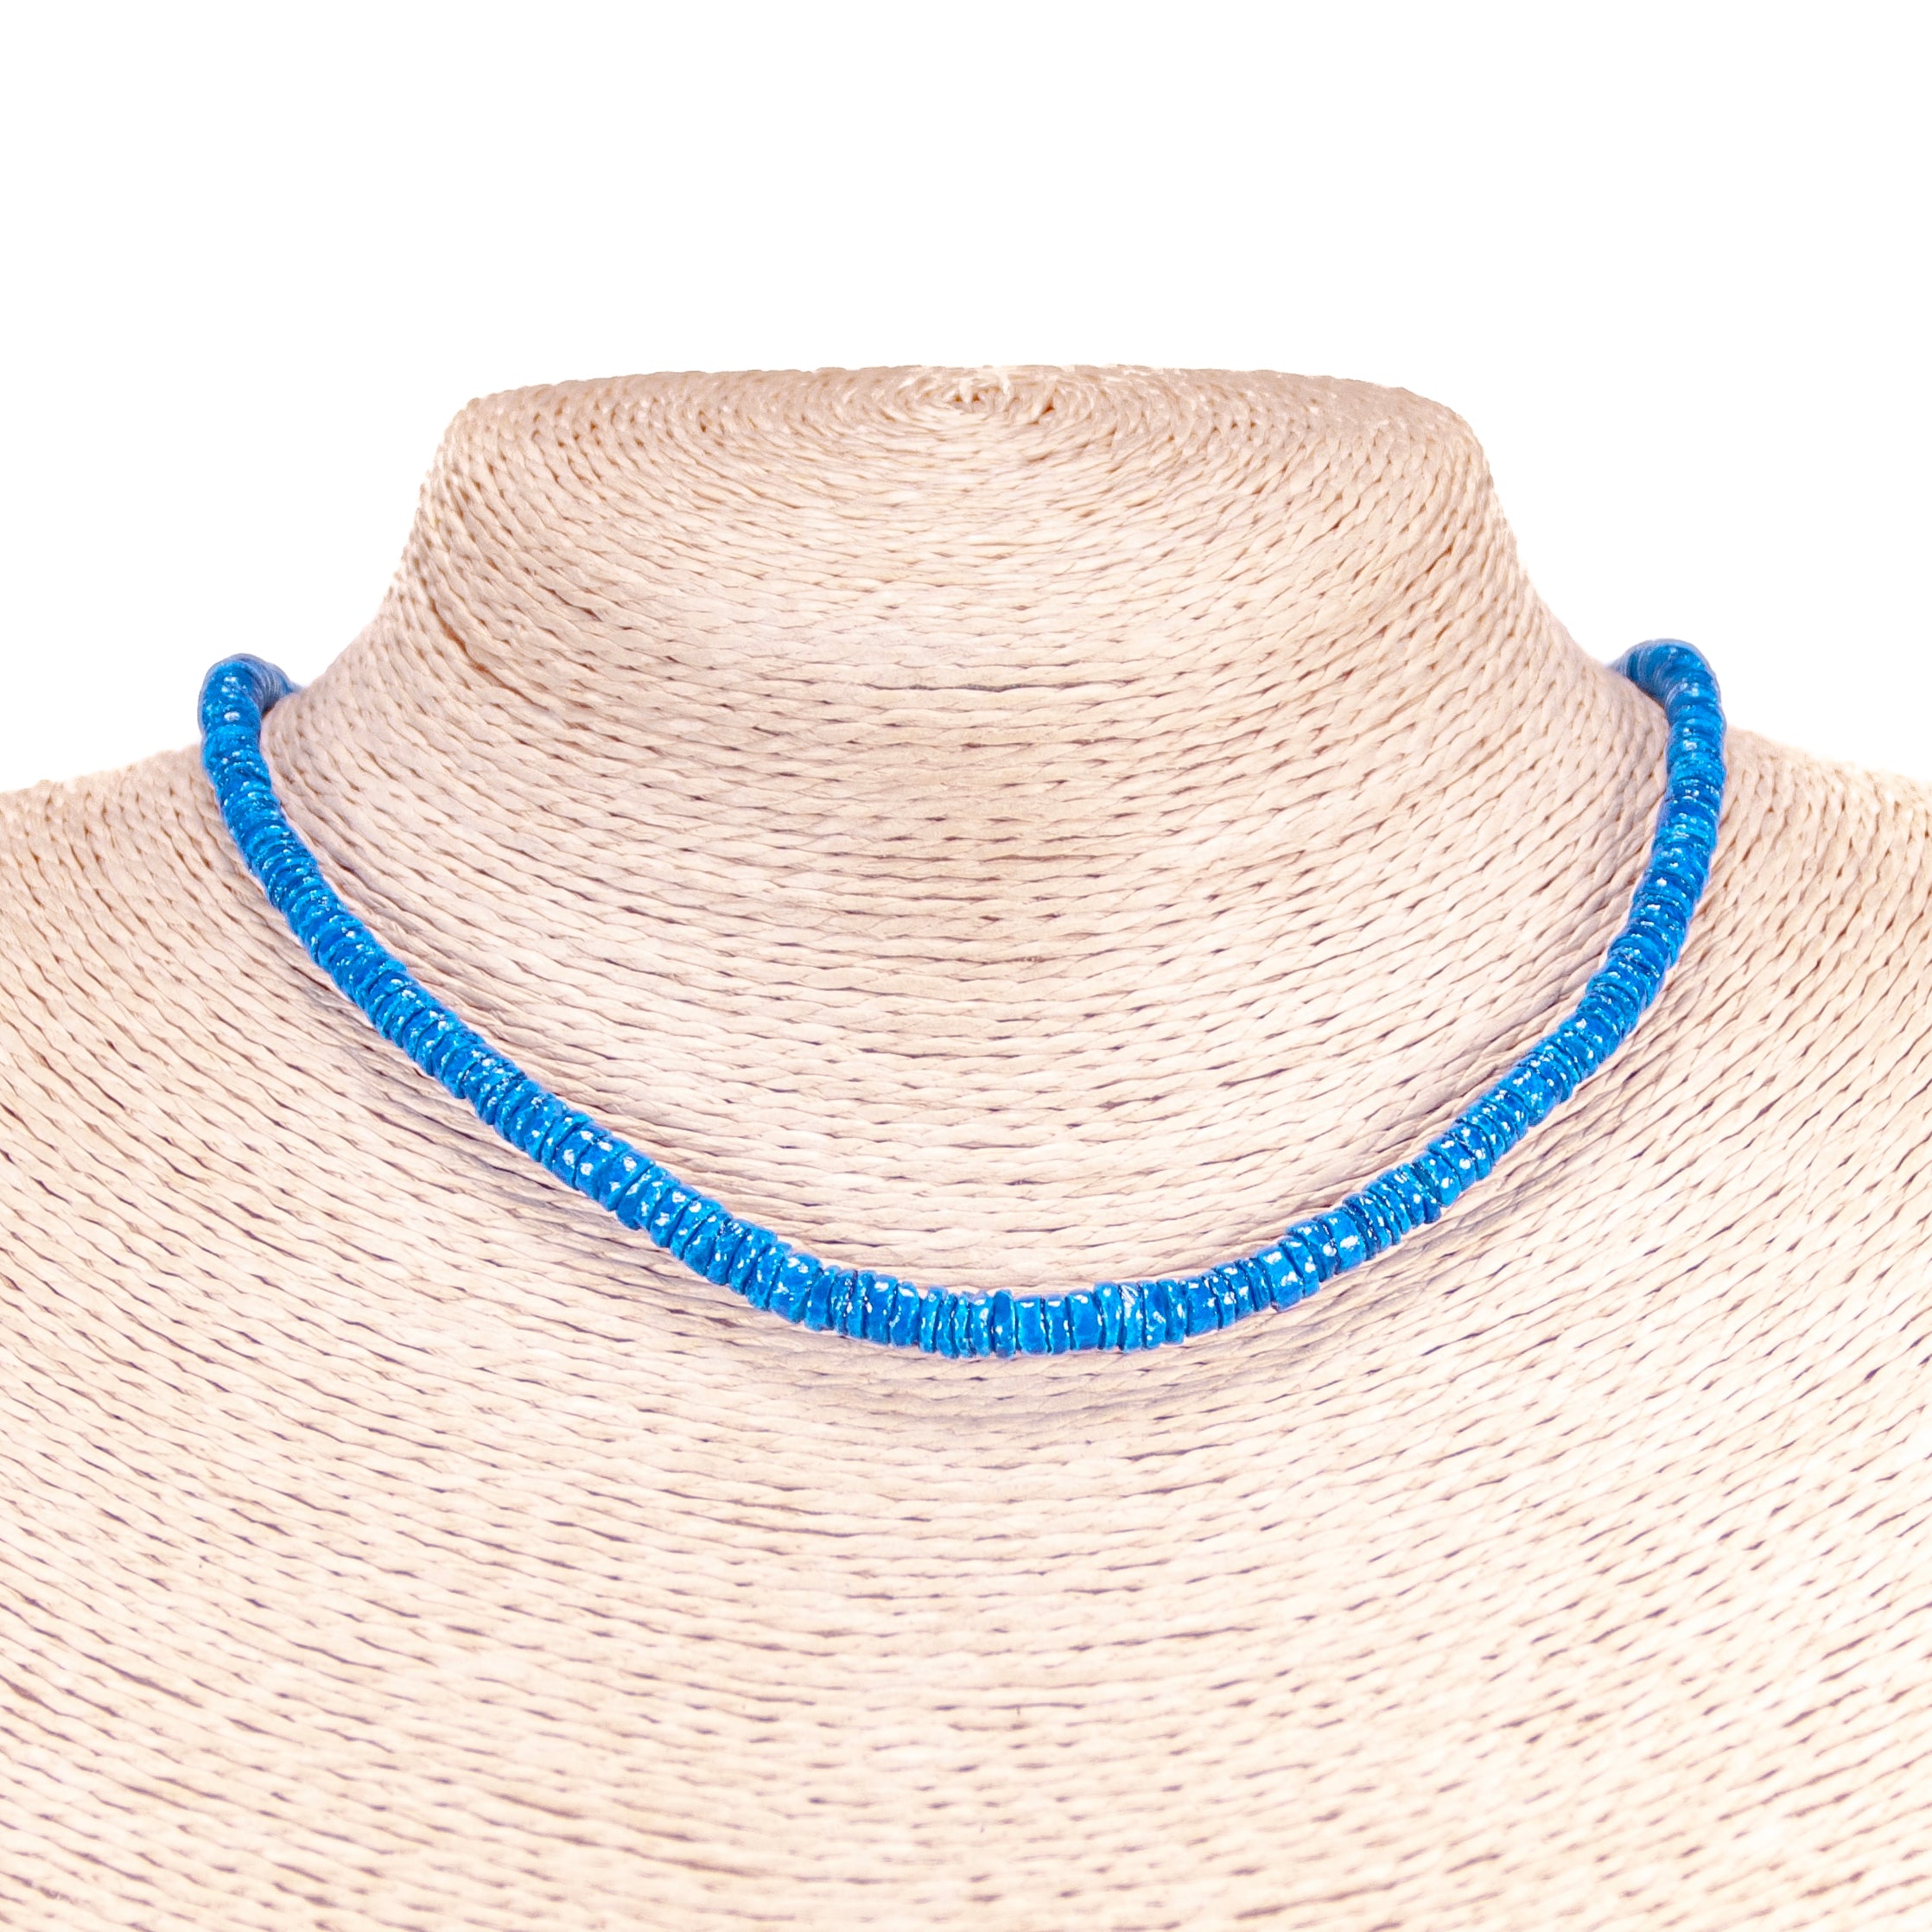 Dark Blue Puka Shell Beads Necklace and Anklet Set